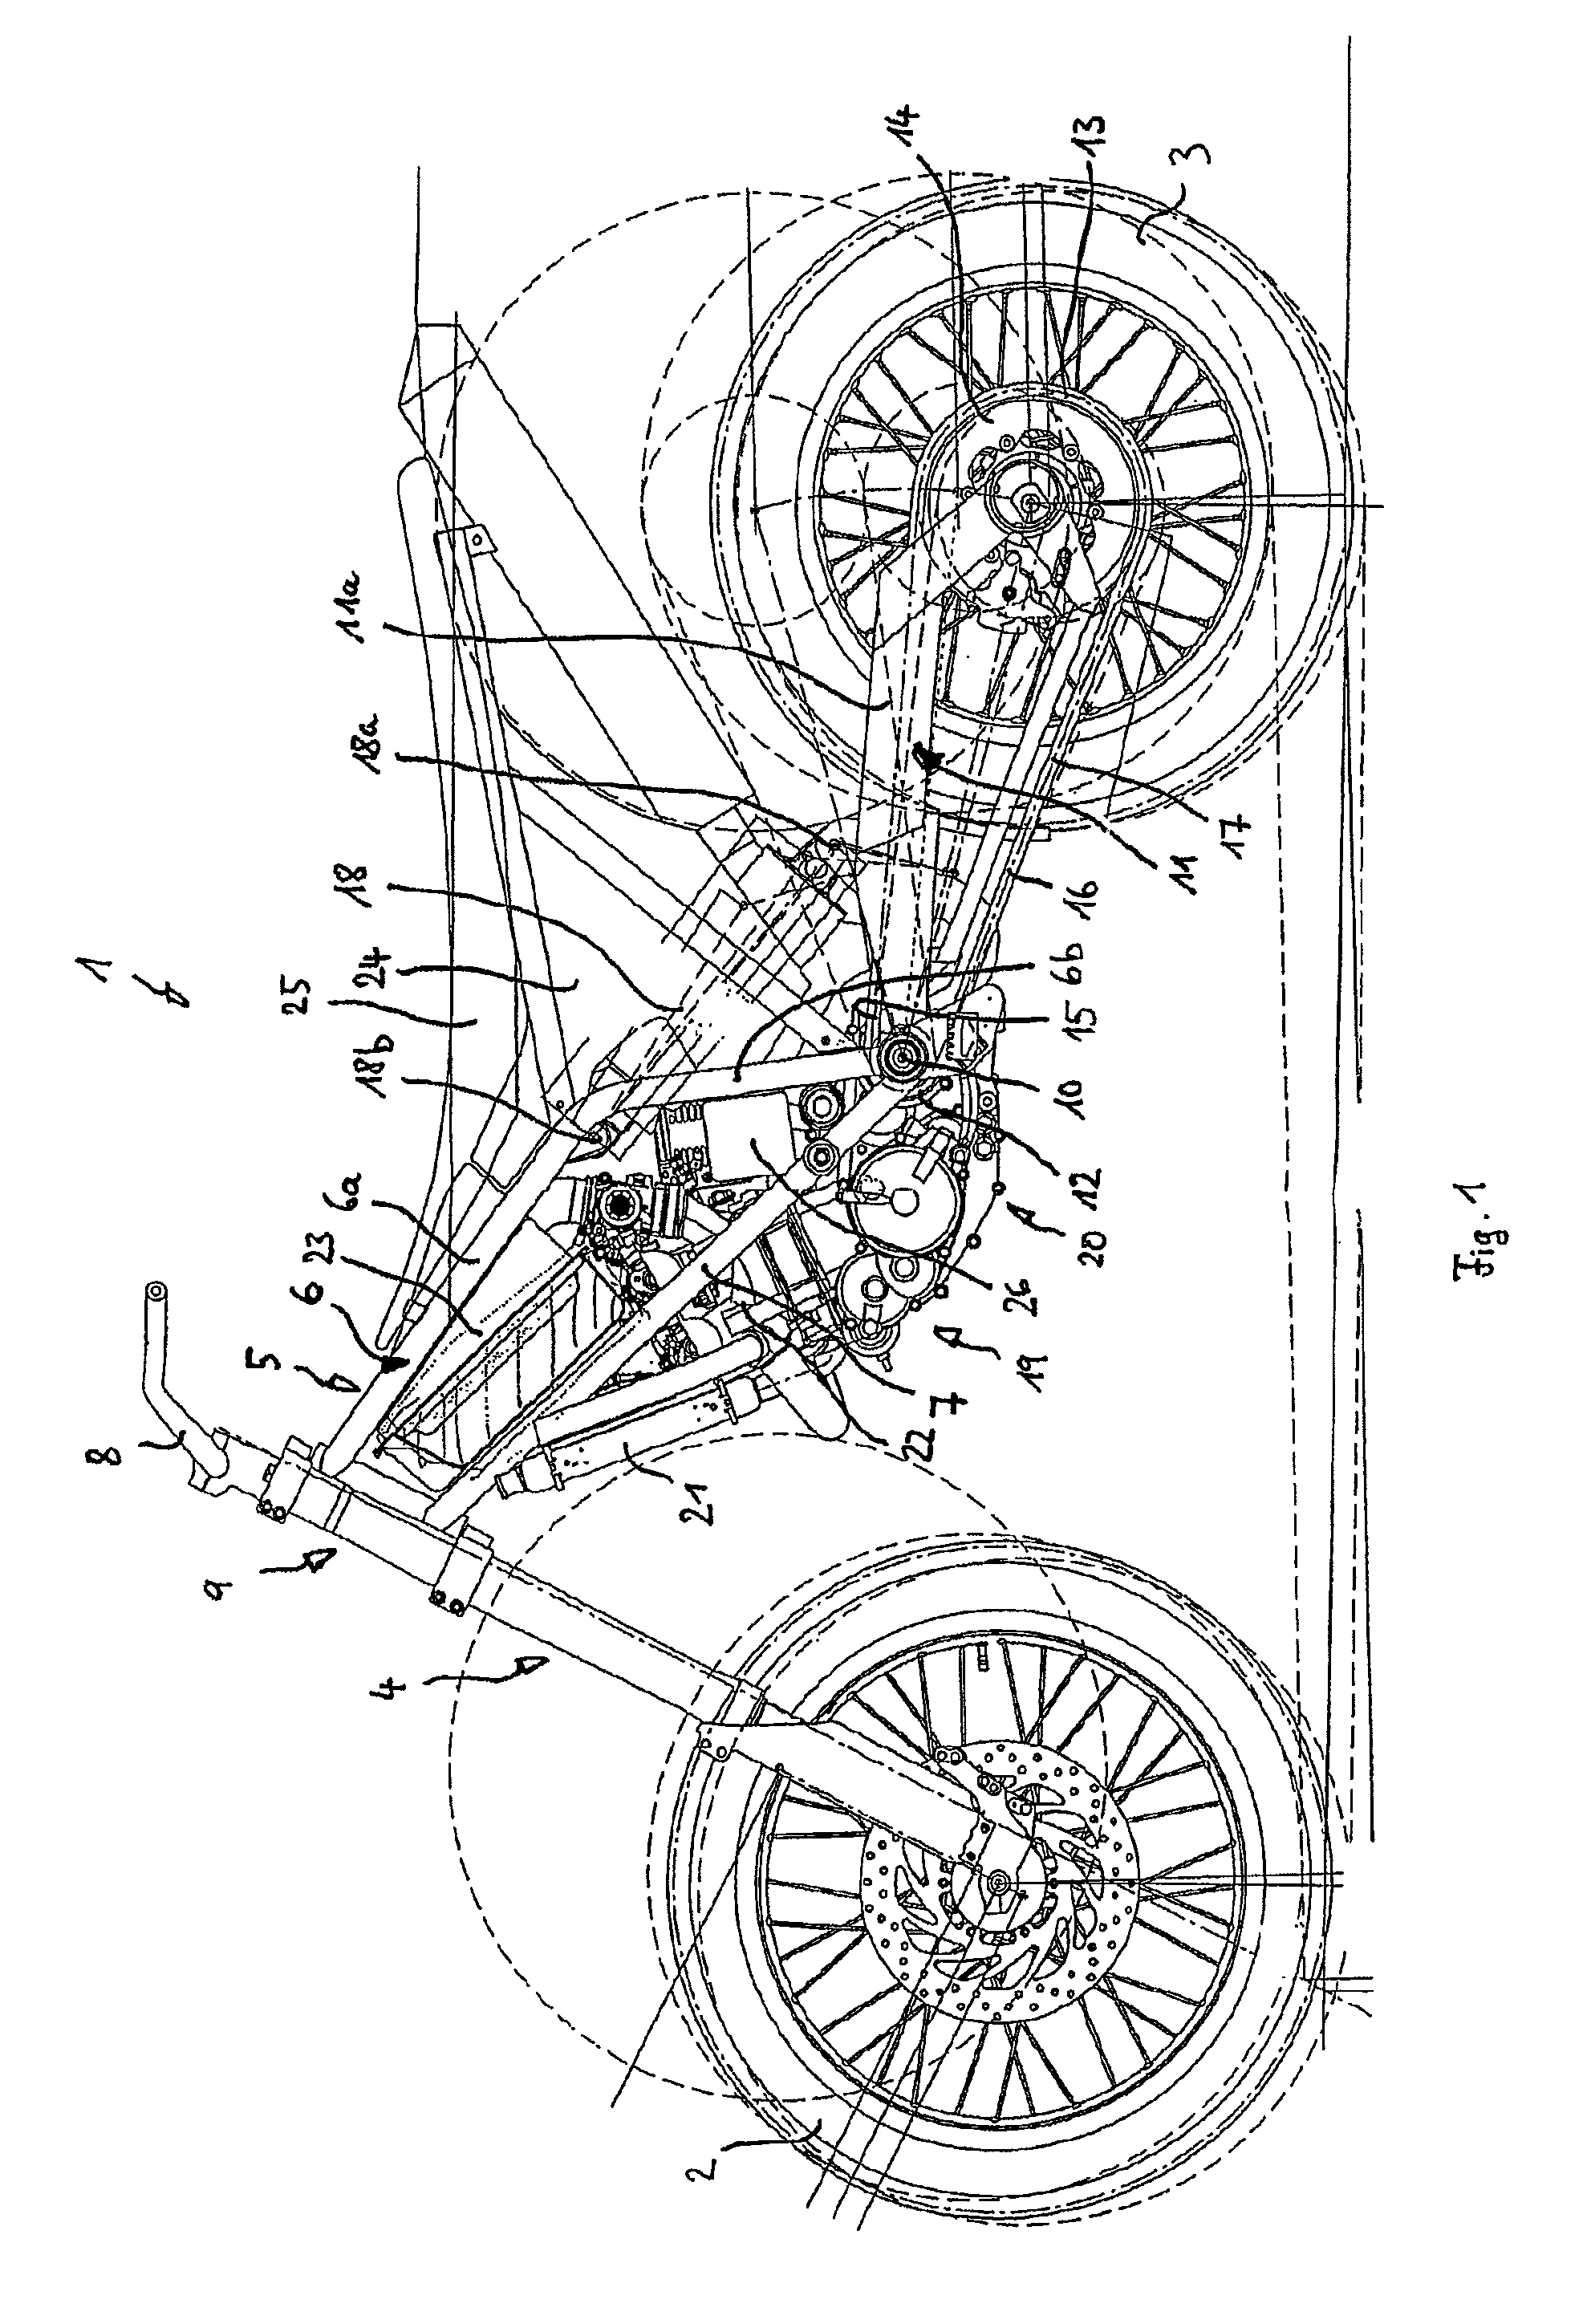 Vehicle in particular a motorcycle and engine/gearbox unit for a vehicle